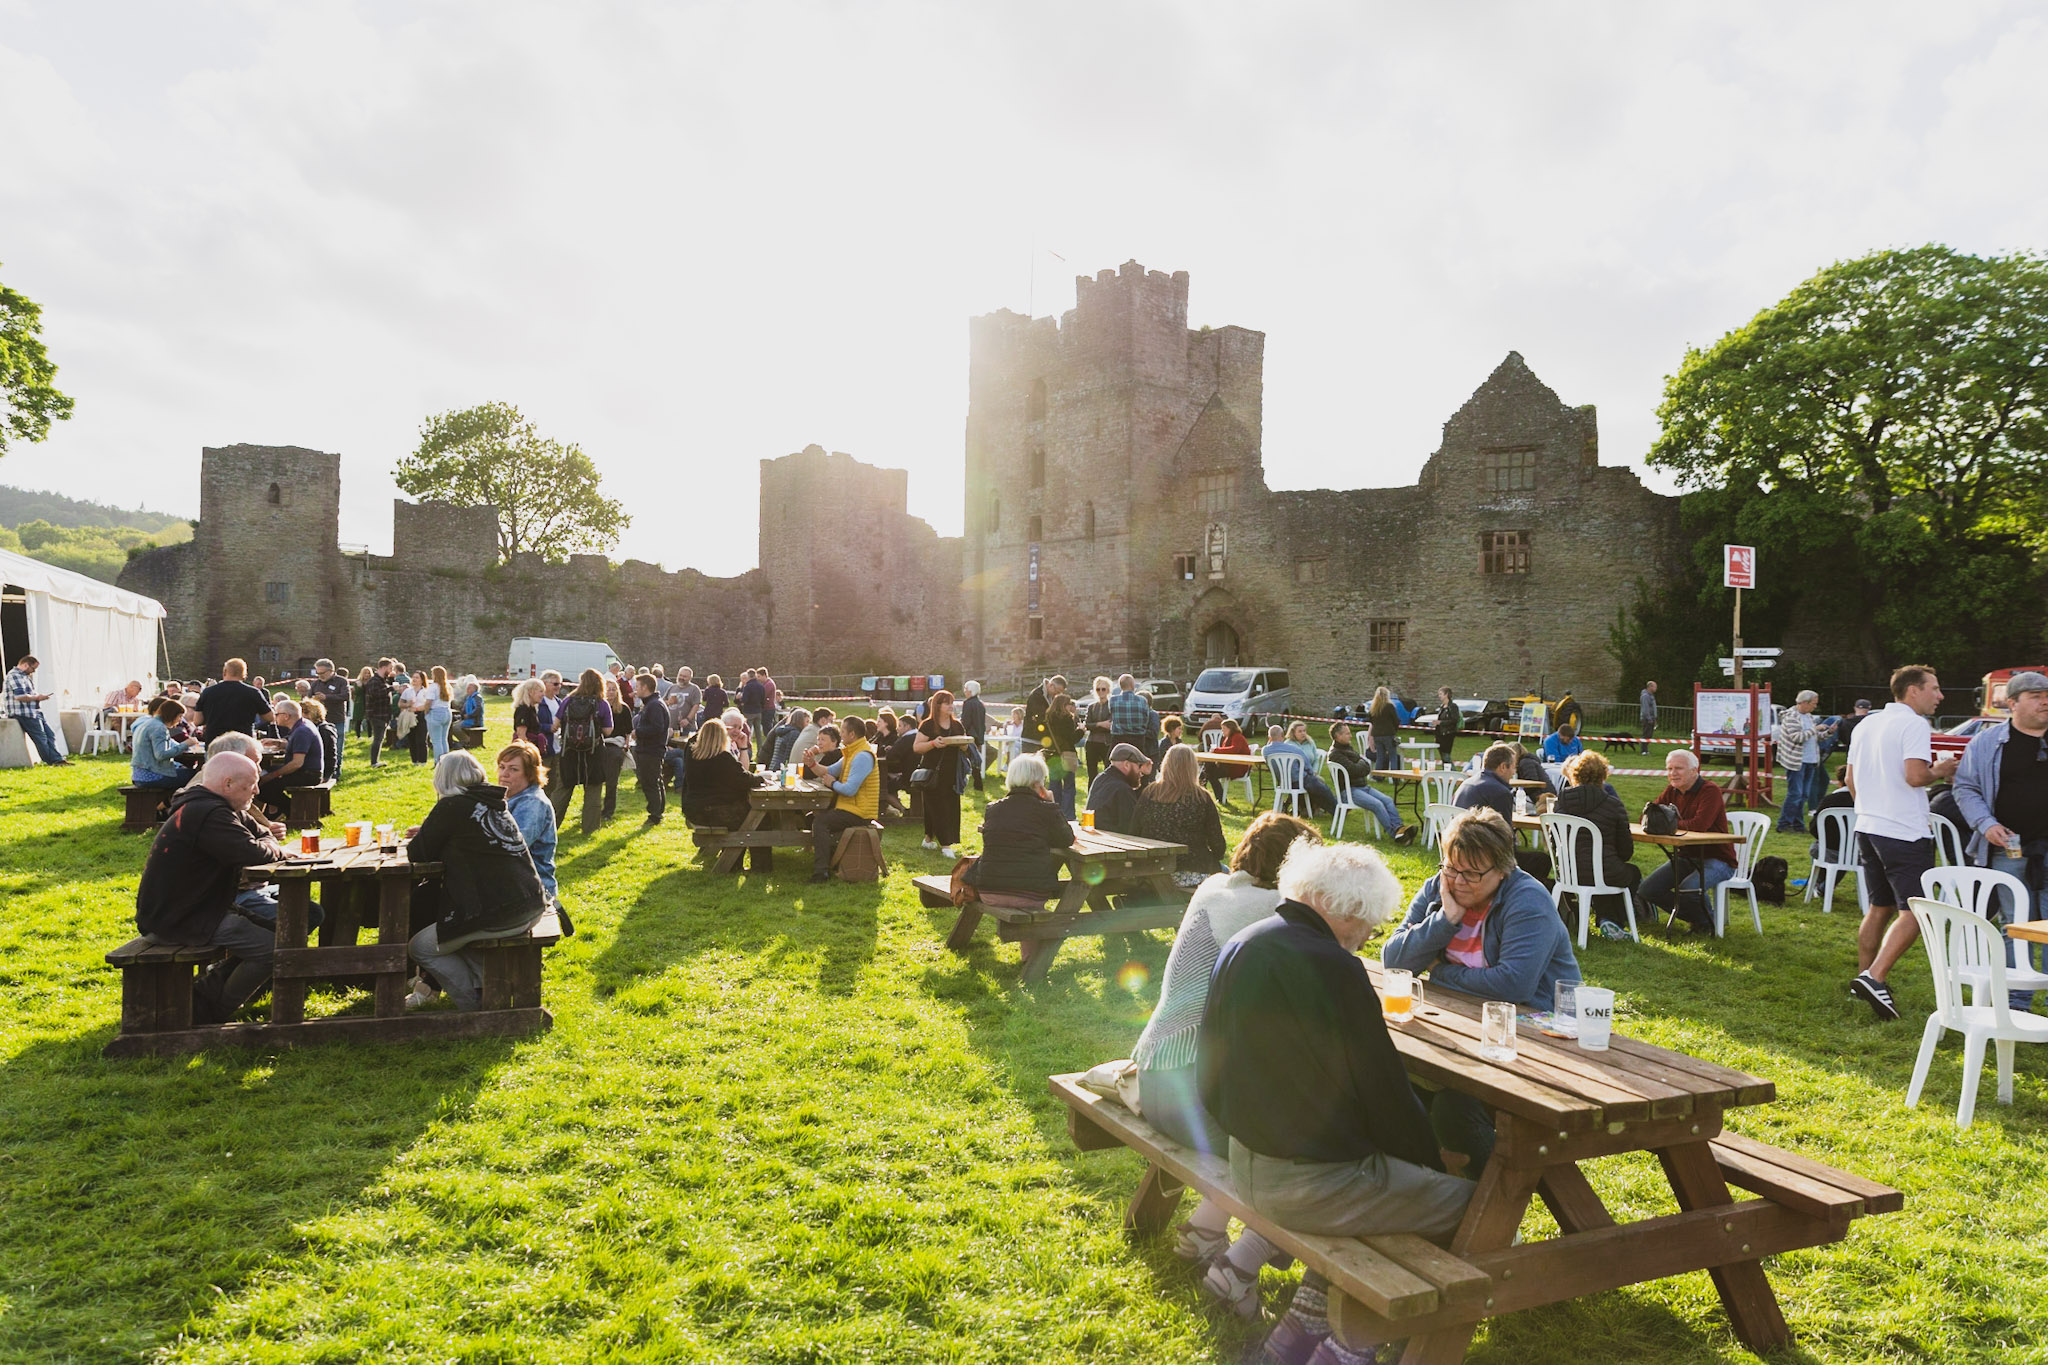  LUDLOW SPRING FESTIVAL RETURNS TO LUDLOW CASTLE WITH BEER, FOOD, CLASSIC VEHICLES & TOP-NOTCH ENTERTAINMENT